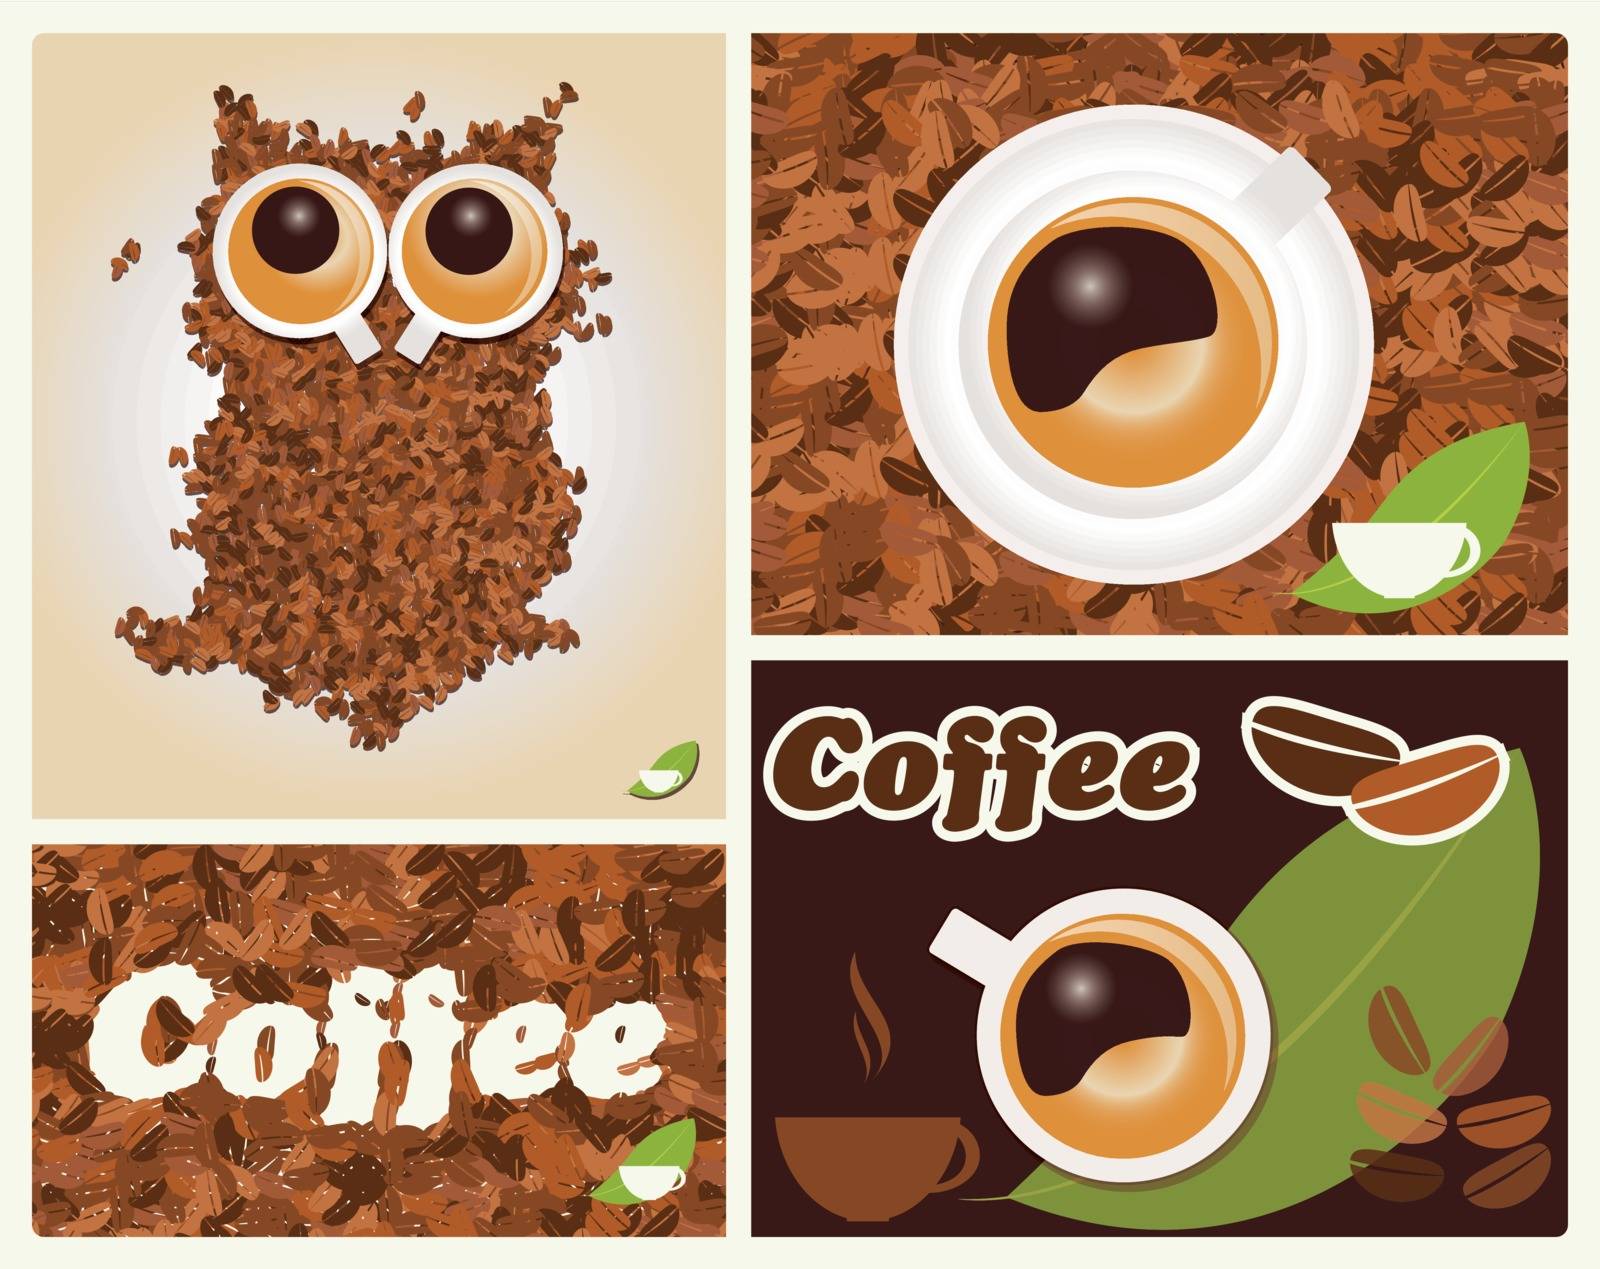 coffee inspired illustrations, with owl, coffee beans 